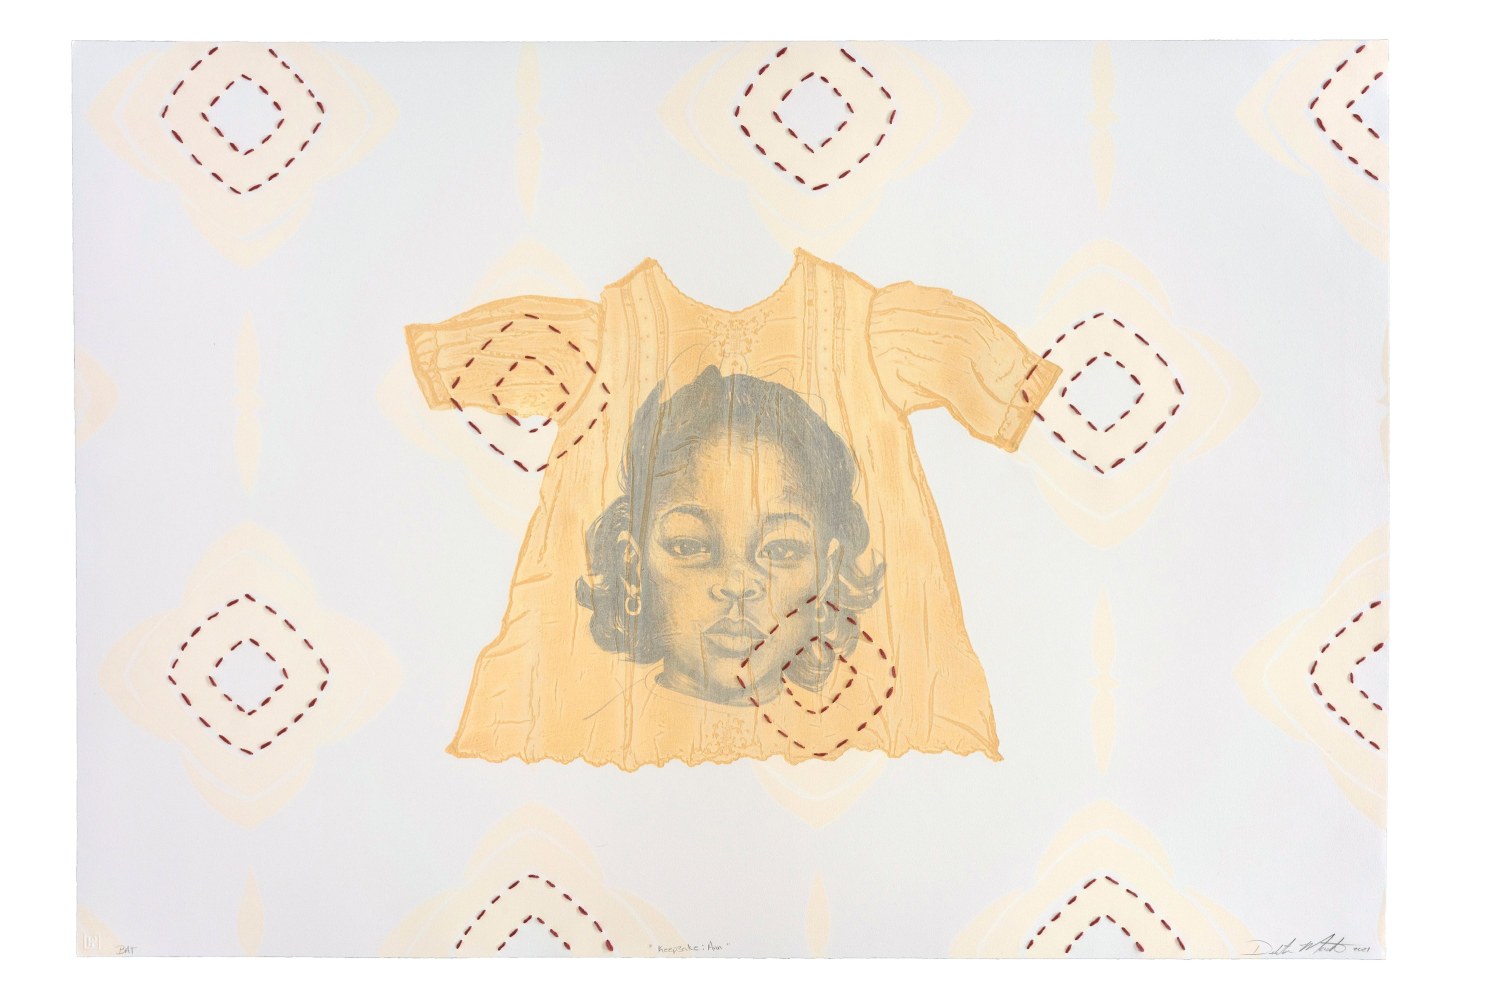 Ann&amp;nbsp;
Delita Martin, 2021&amp;nbsp;

Lithography with collagraph and hand stitching
29&amp;quot; x 41 &amp;frac12;&amp;quot;&amp;nbsp;
Edition of 20
$3,500; (Contact for suite price)

Printed and Published by&amp;nbsp;Highpoint Editions

INQUIRE

&amp;nbsp;

&amp;nbsp;